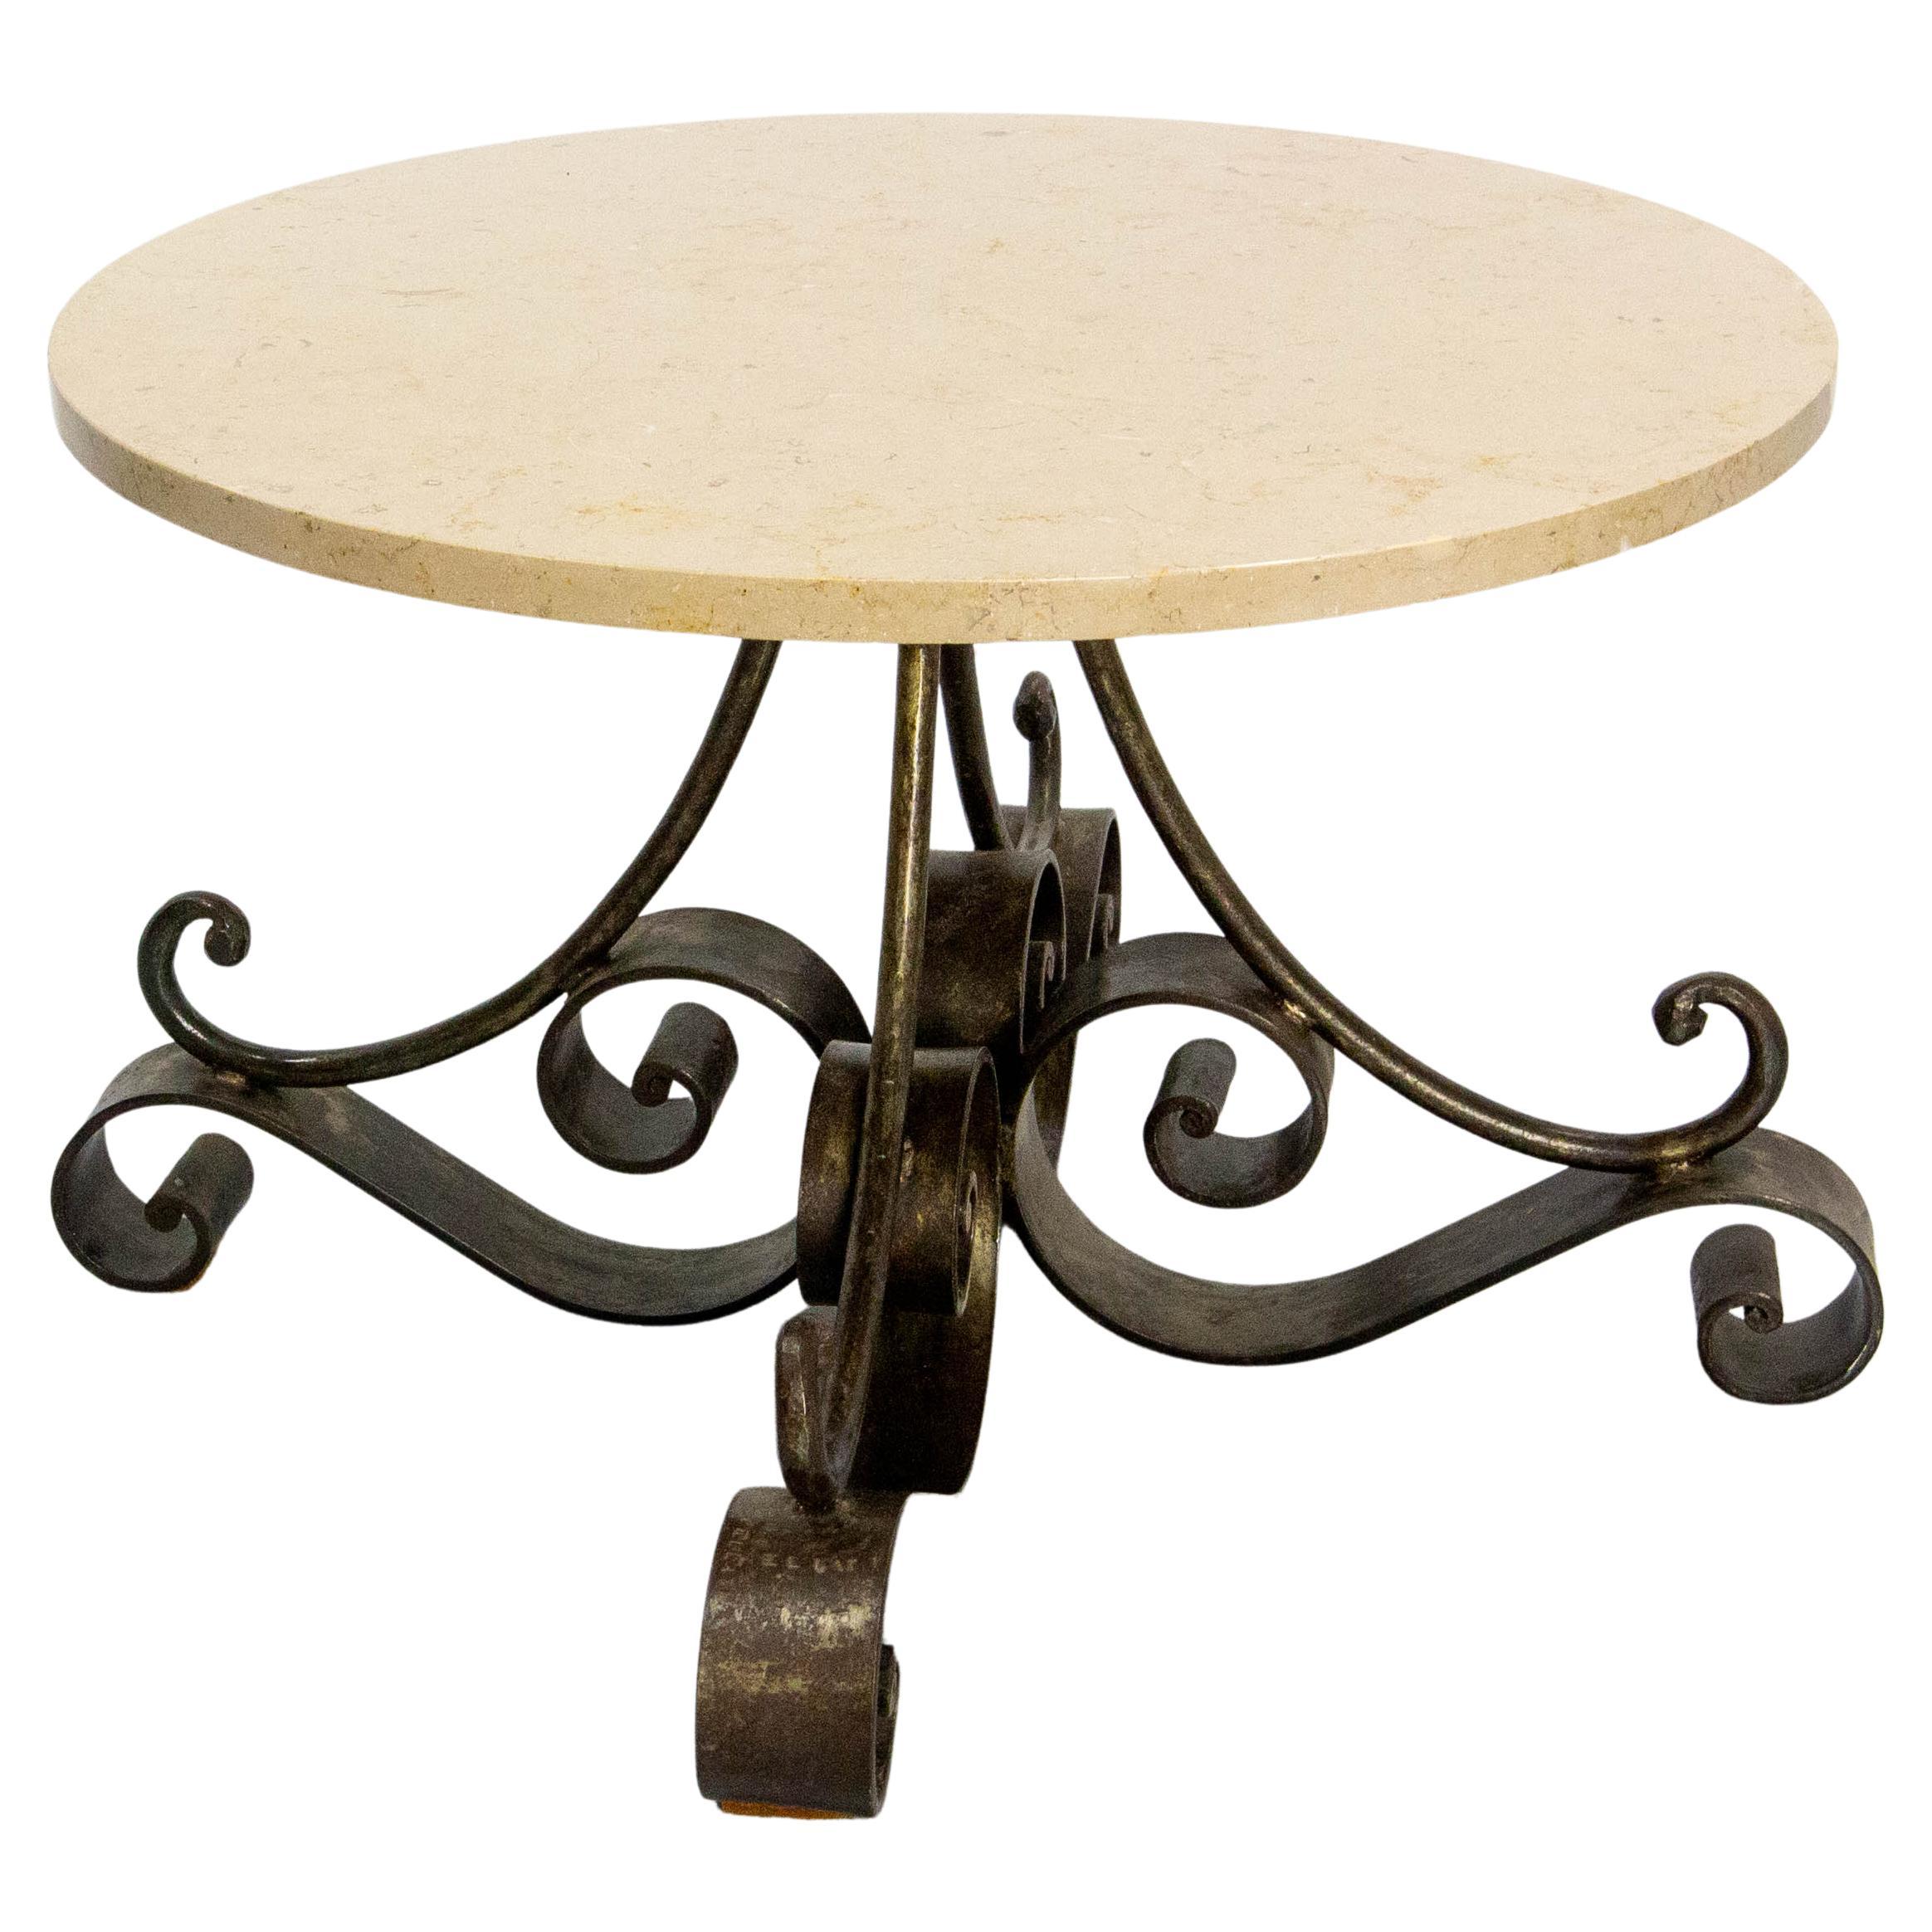 French travertine top and wrought iron pedestal coffee table.
signed by Pellati.
Delivred in two packs.
In good condition.

Shipping:
66 / 66 / 5 cm 18 kg
59 / 59 / 41 cm 18 kg